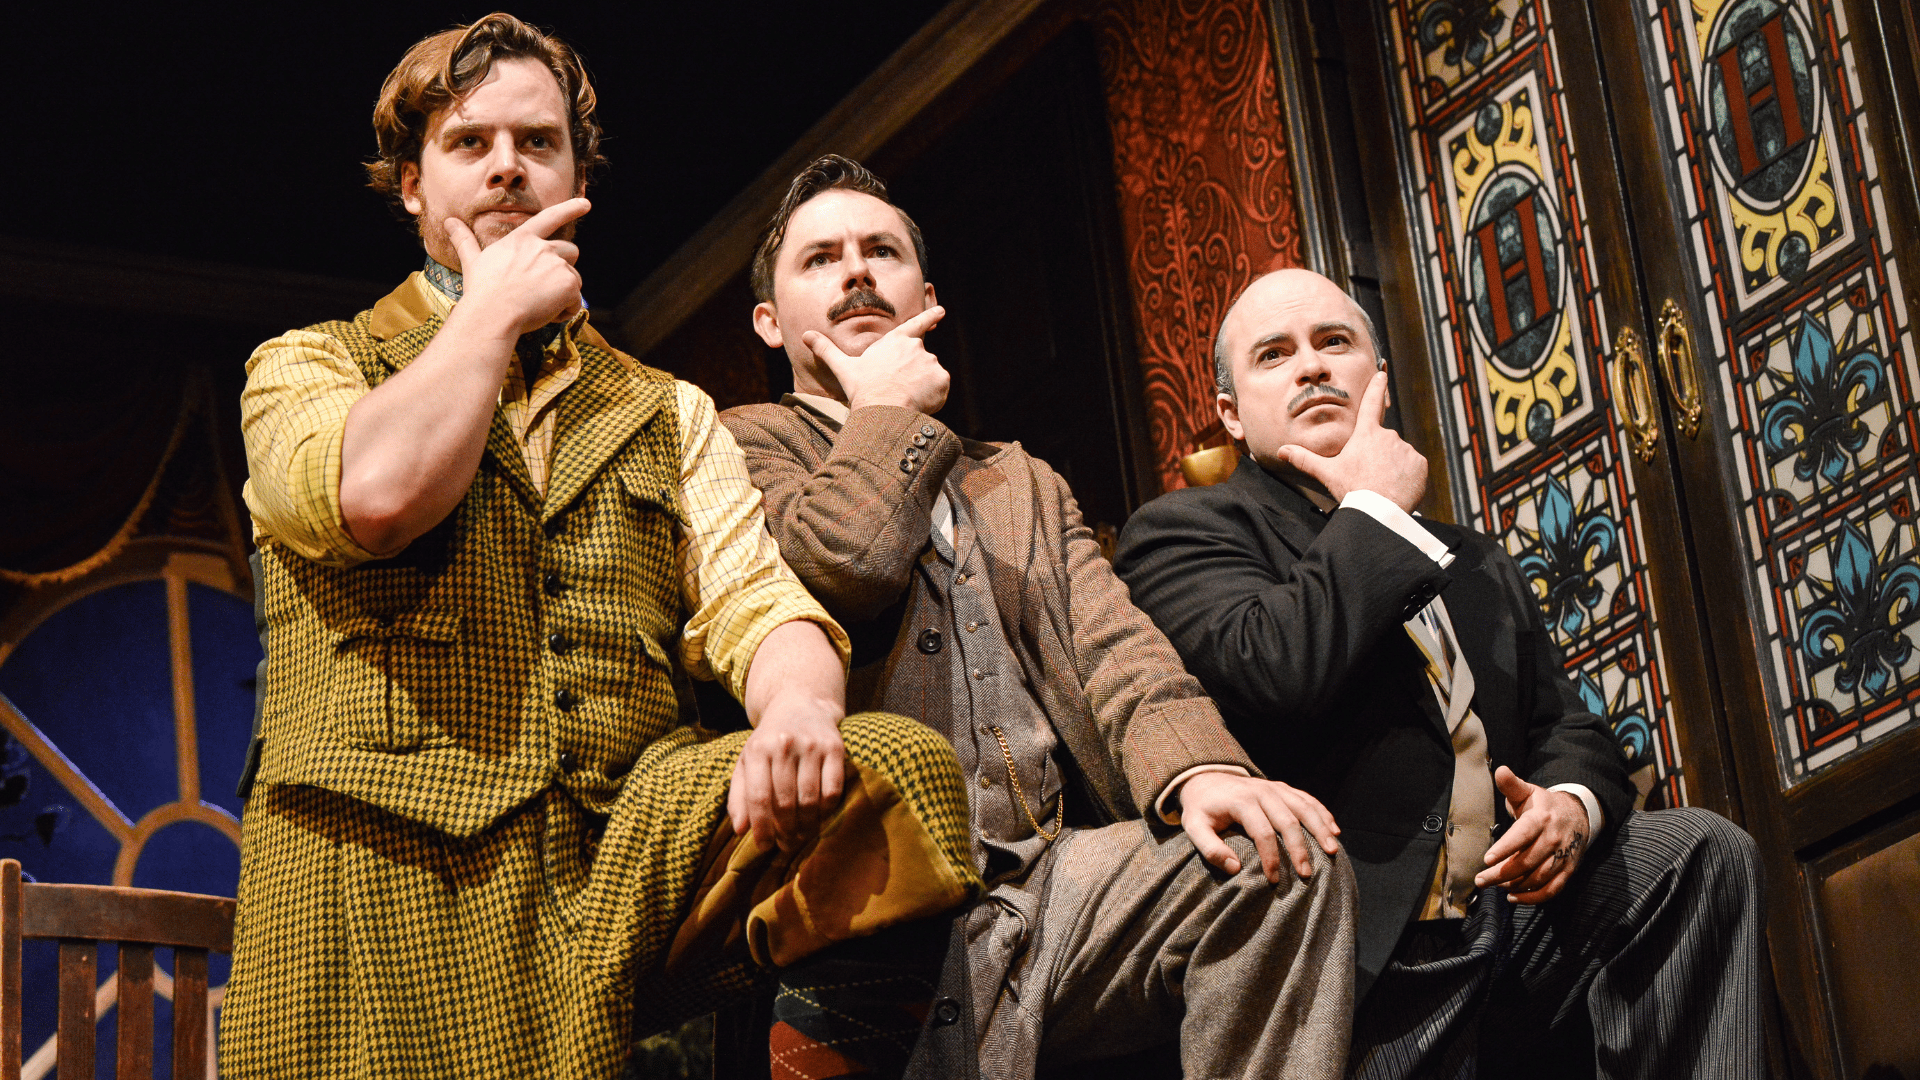 The Play That Goes Wrong Production Shot: Robert (Matthew Howell), Chris (James Watterson) and Dennis (Edward Howells) are standing next to each other all in the same position - one foot up on a rest, left hand resting on their left knee and their finger and thumb (right hand) stroking their chin.